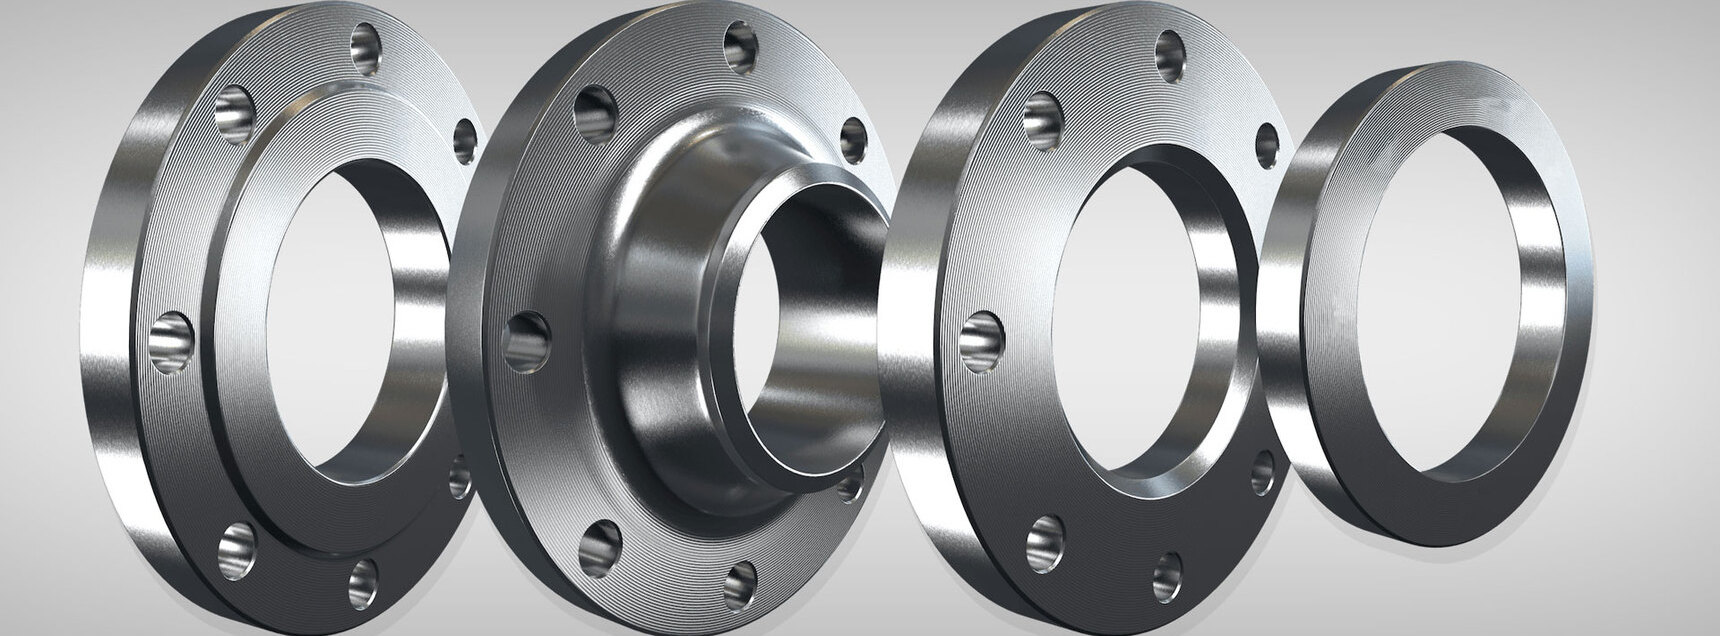 types-of-flanges